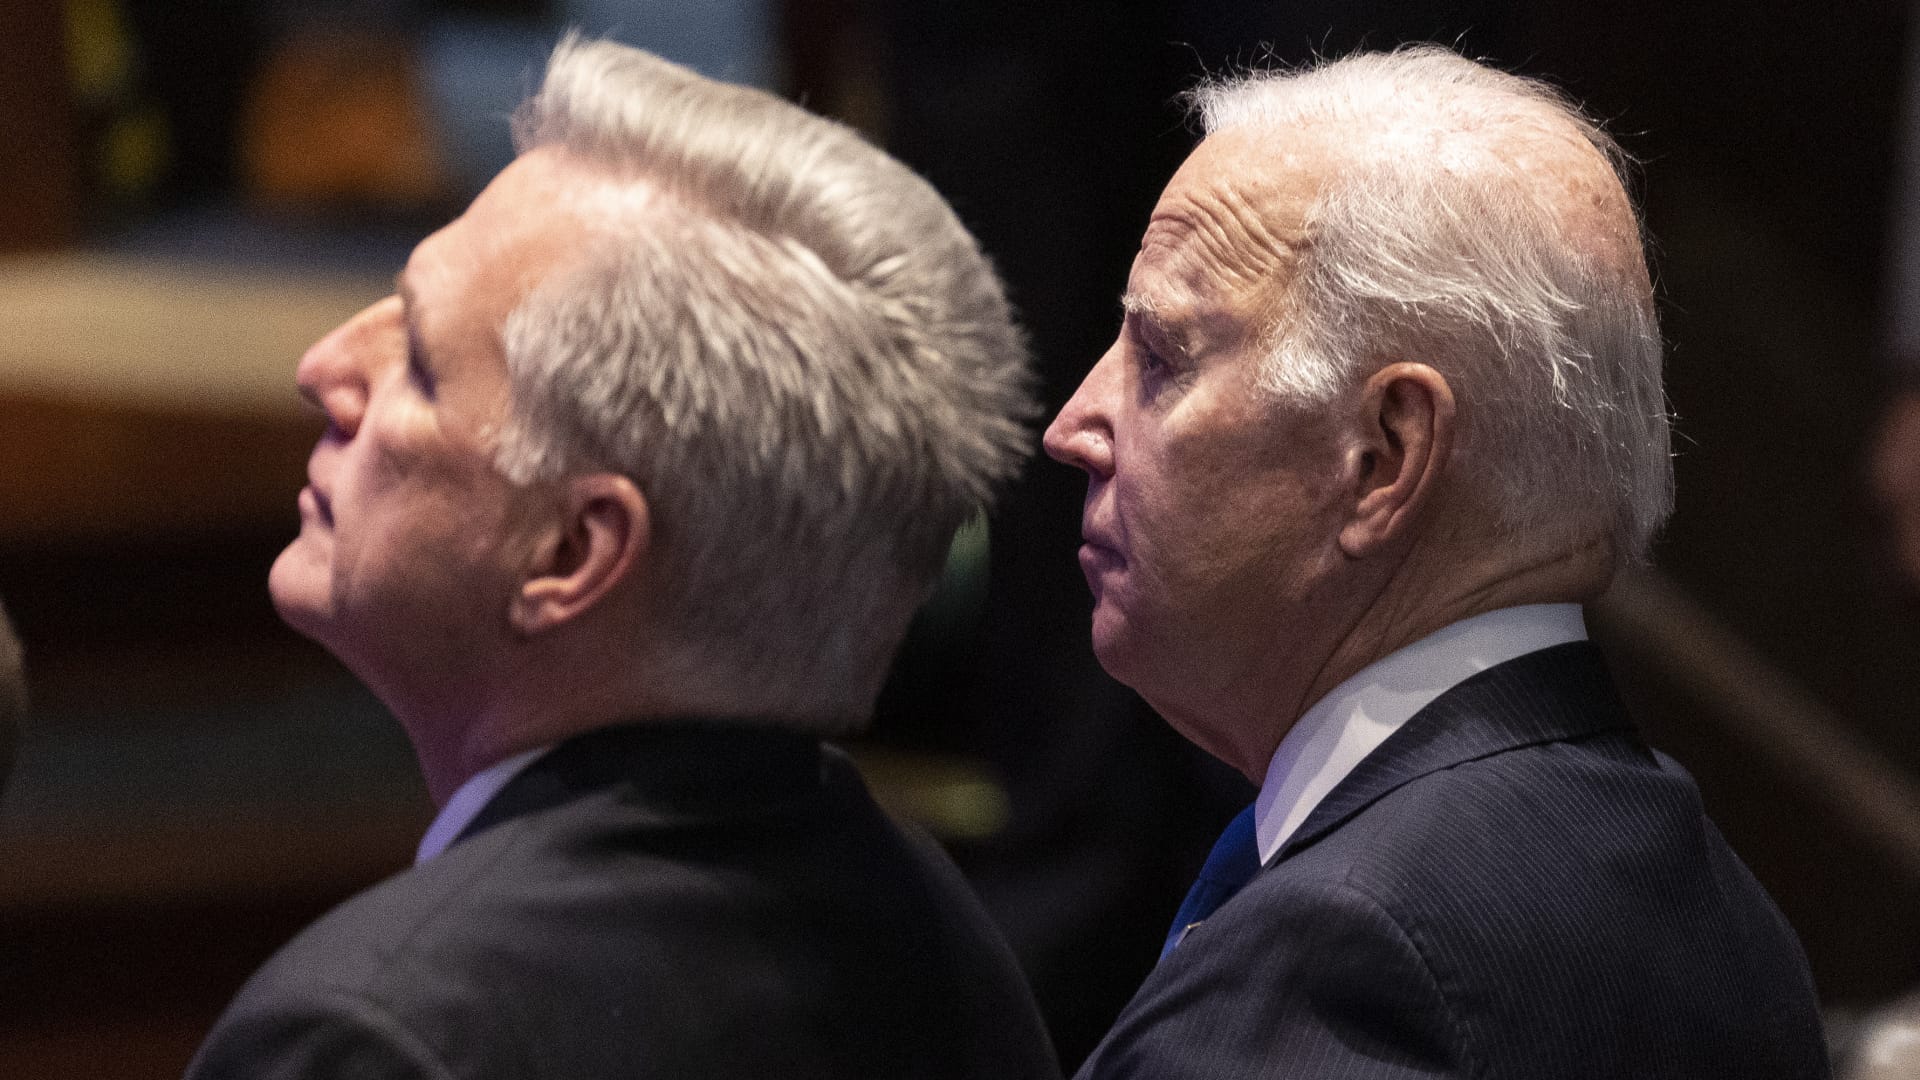 McCarthy and Biden plan to meet again on debt ceiling, but appear no closer to a deal